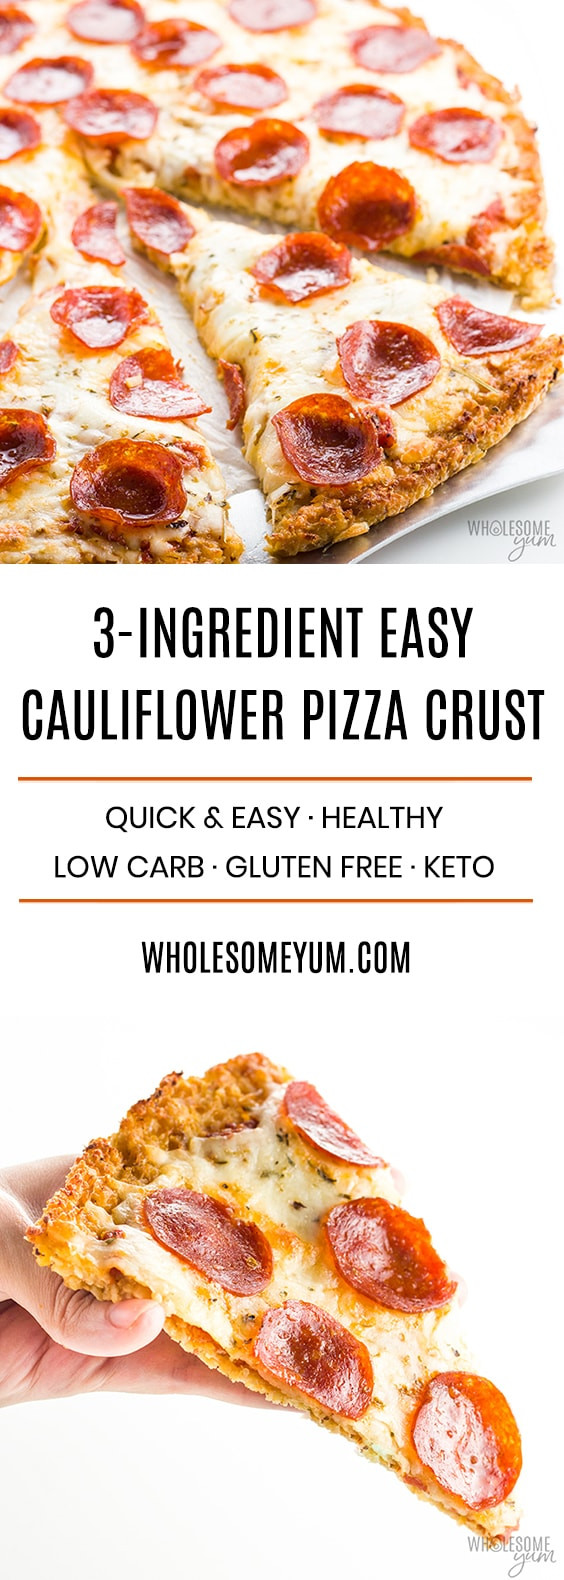 Low Carb Cauliflower Pizza Crust Recipes
 Easy Low Carb Cauliflower Pizza Crust Recipe 3 Ingre nts